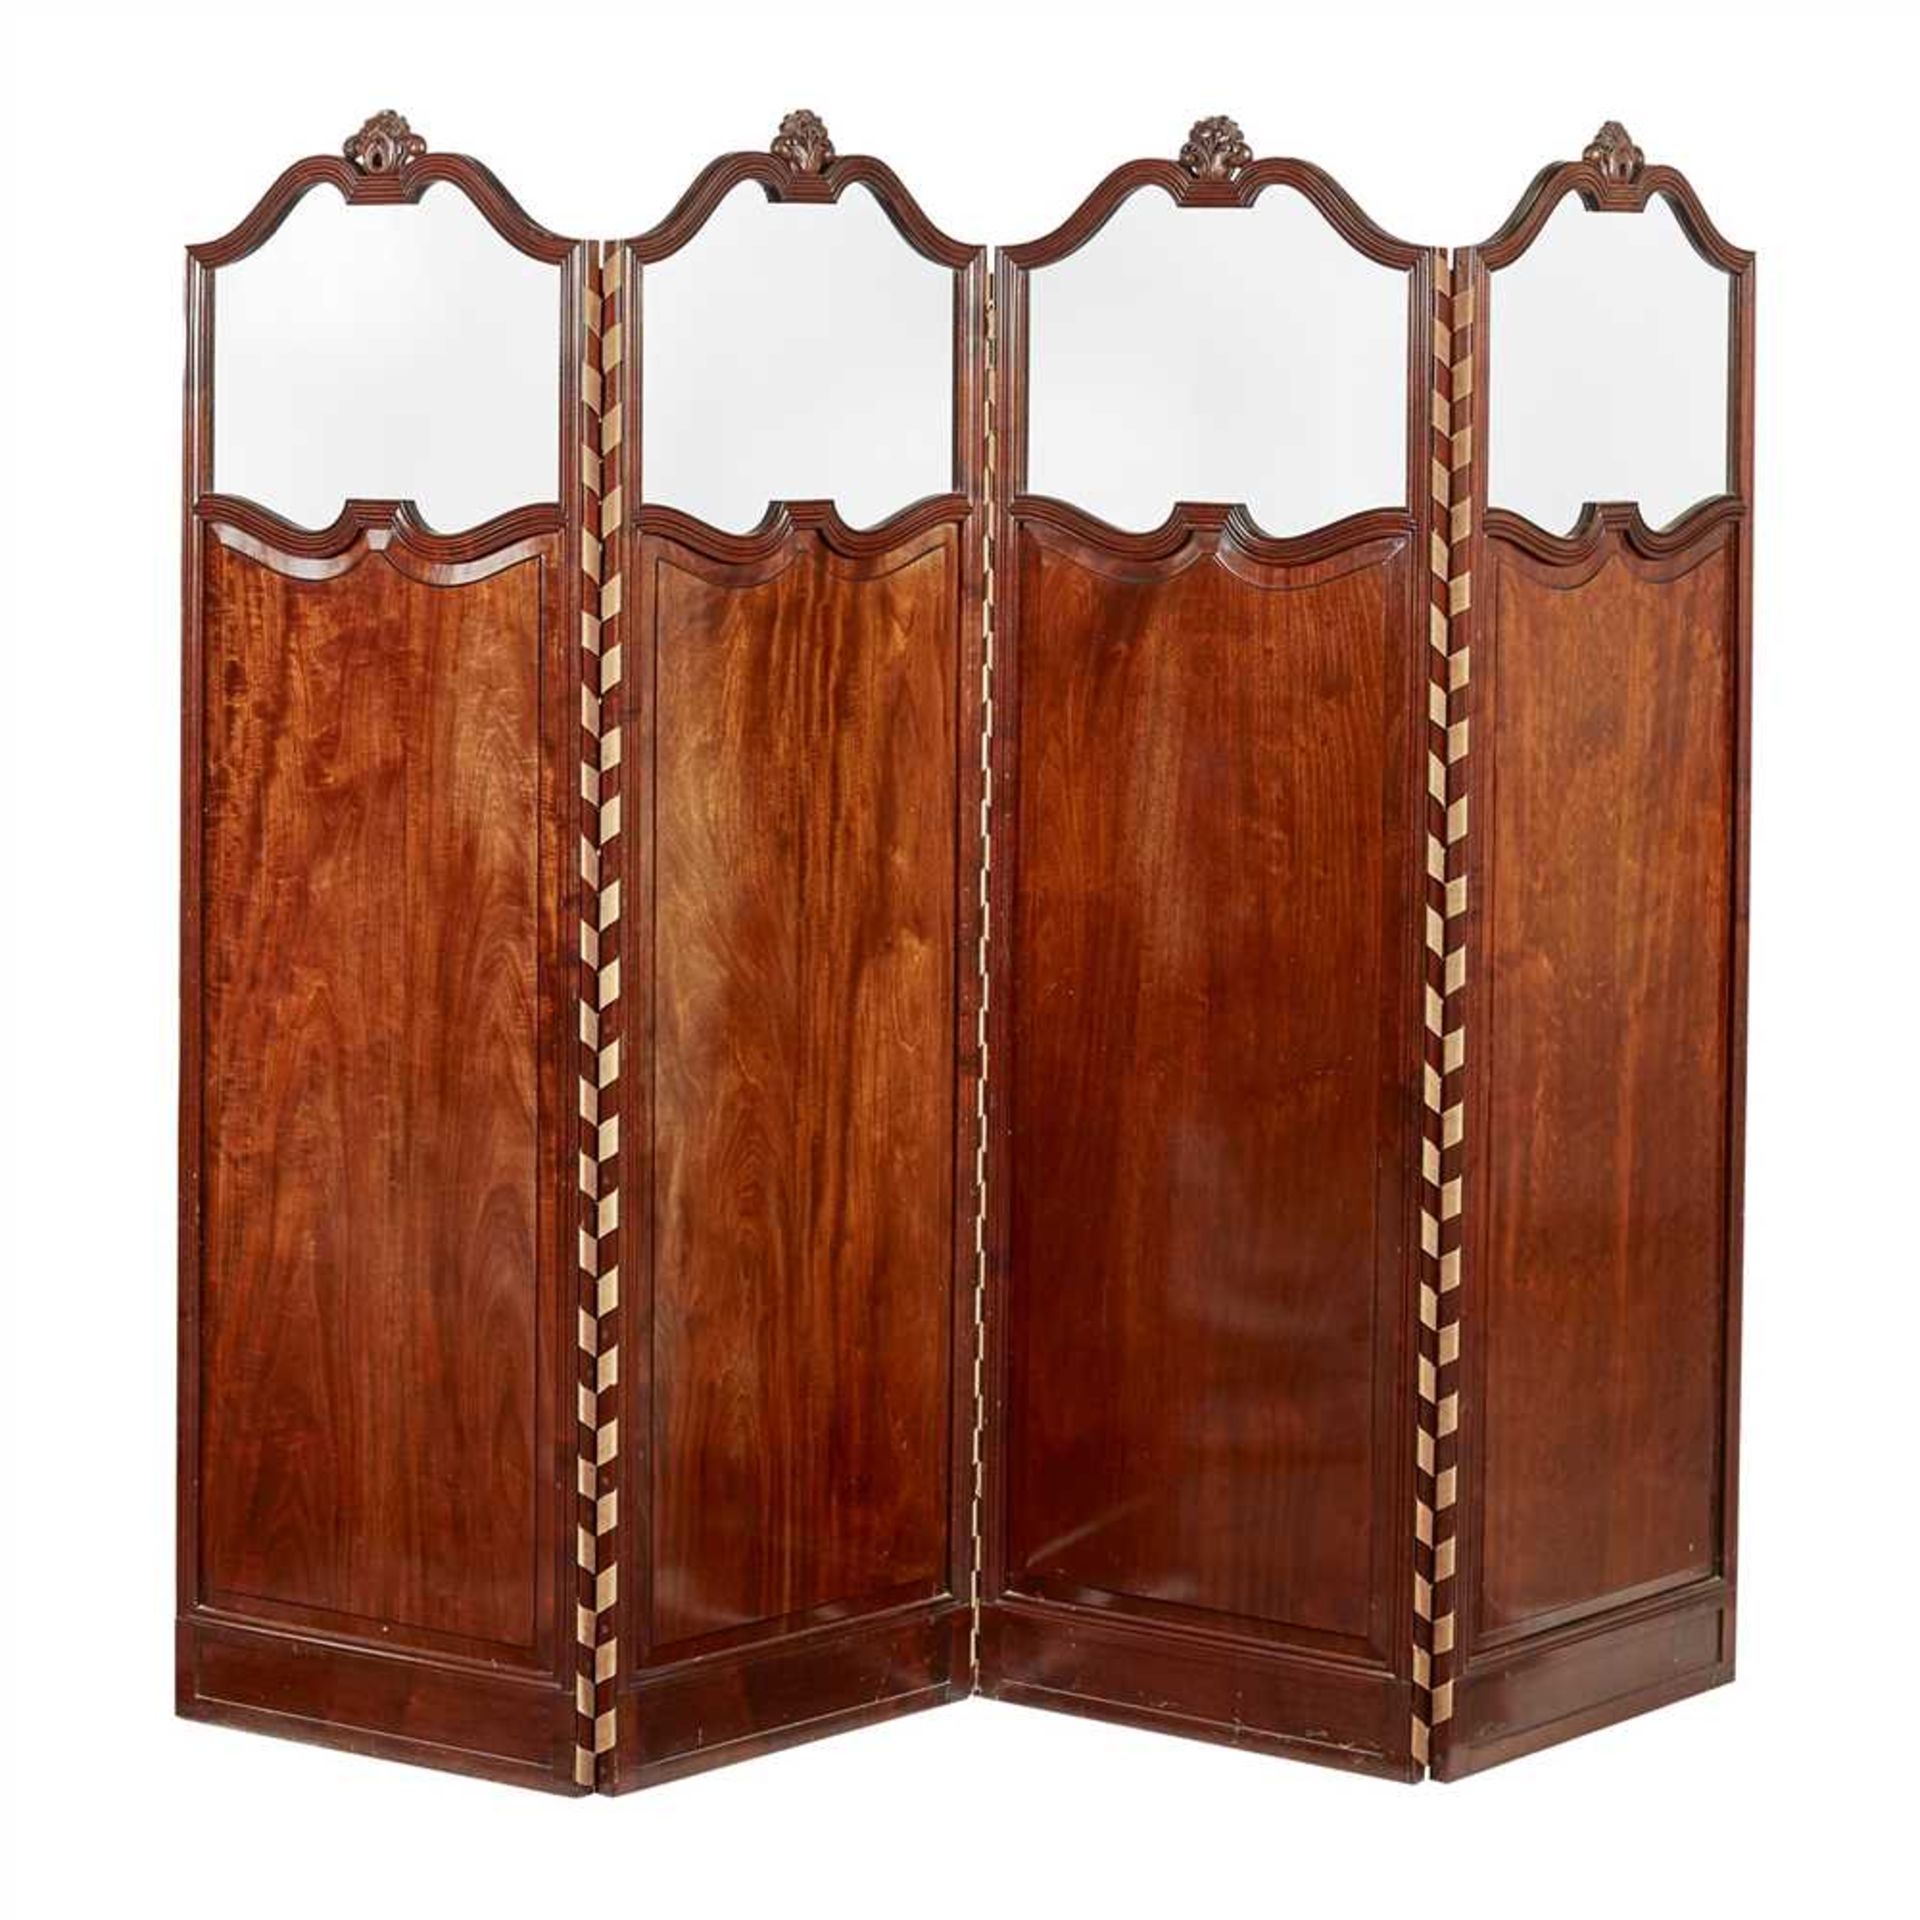 EDWARDIAN CARVED MAHOGANY AND GLAZED FOUR-FOLD SCREEN EARLY 20TH CENTURY